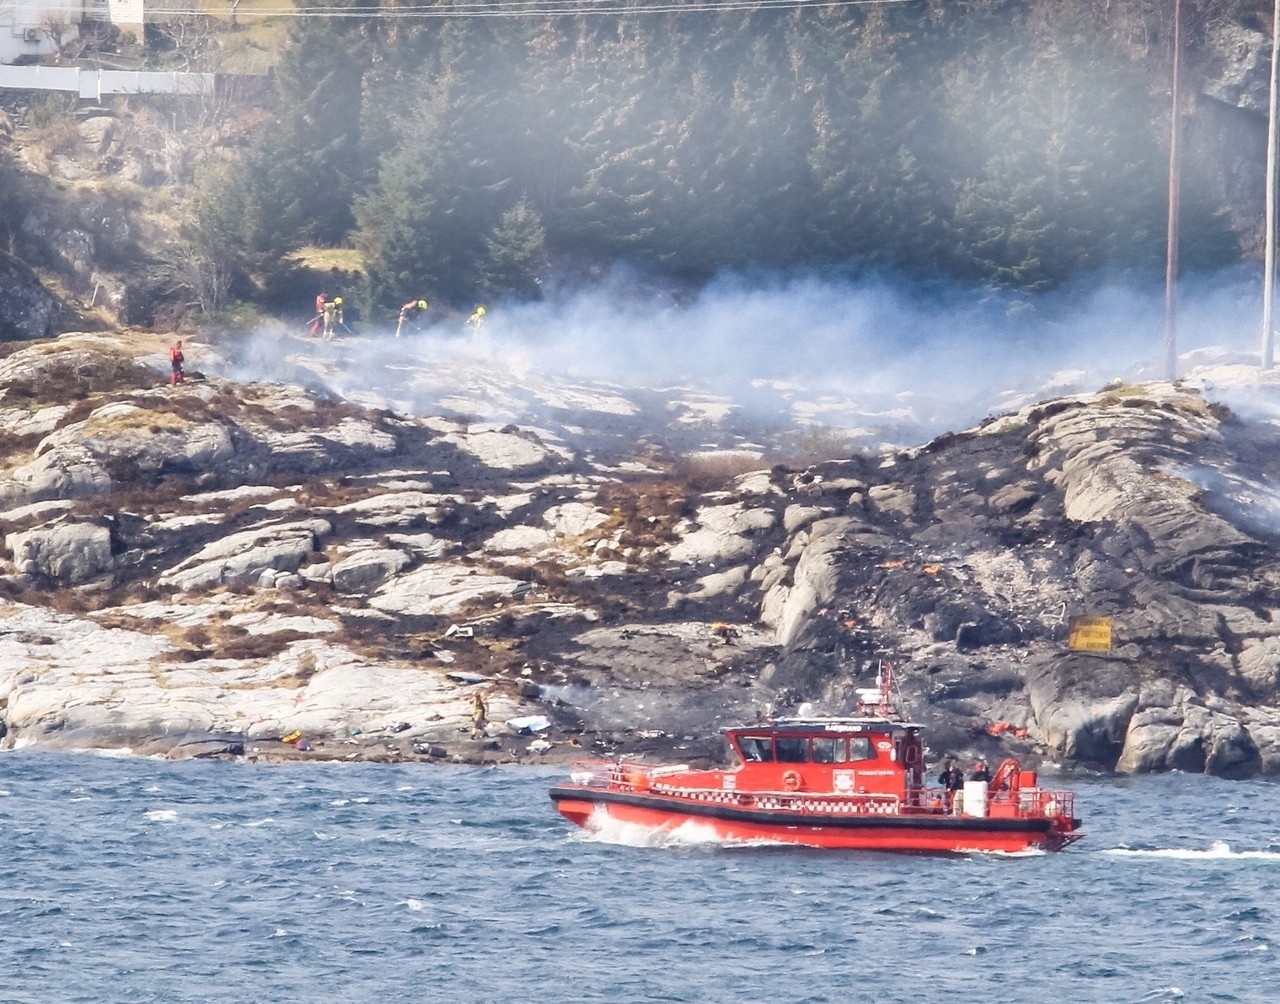 The site where a Super Puma helicopter crashed in Norway in April 2016